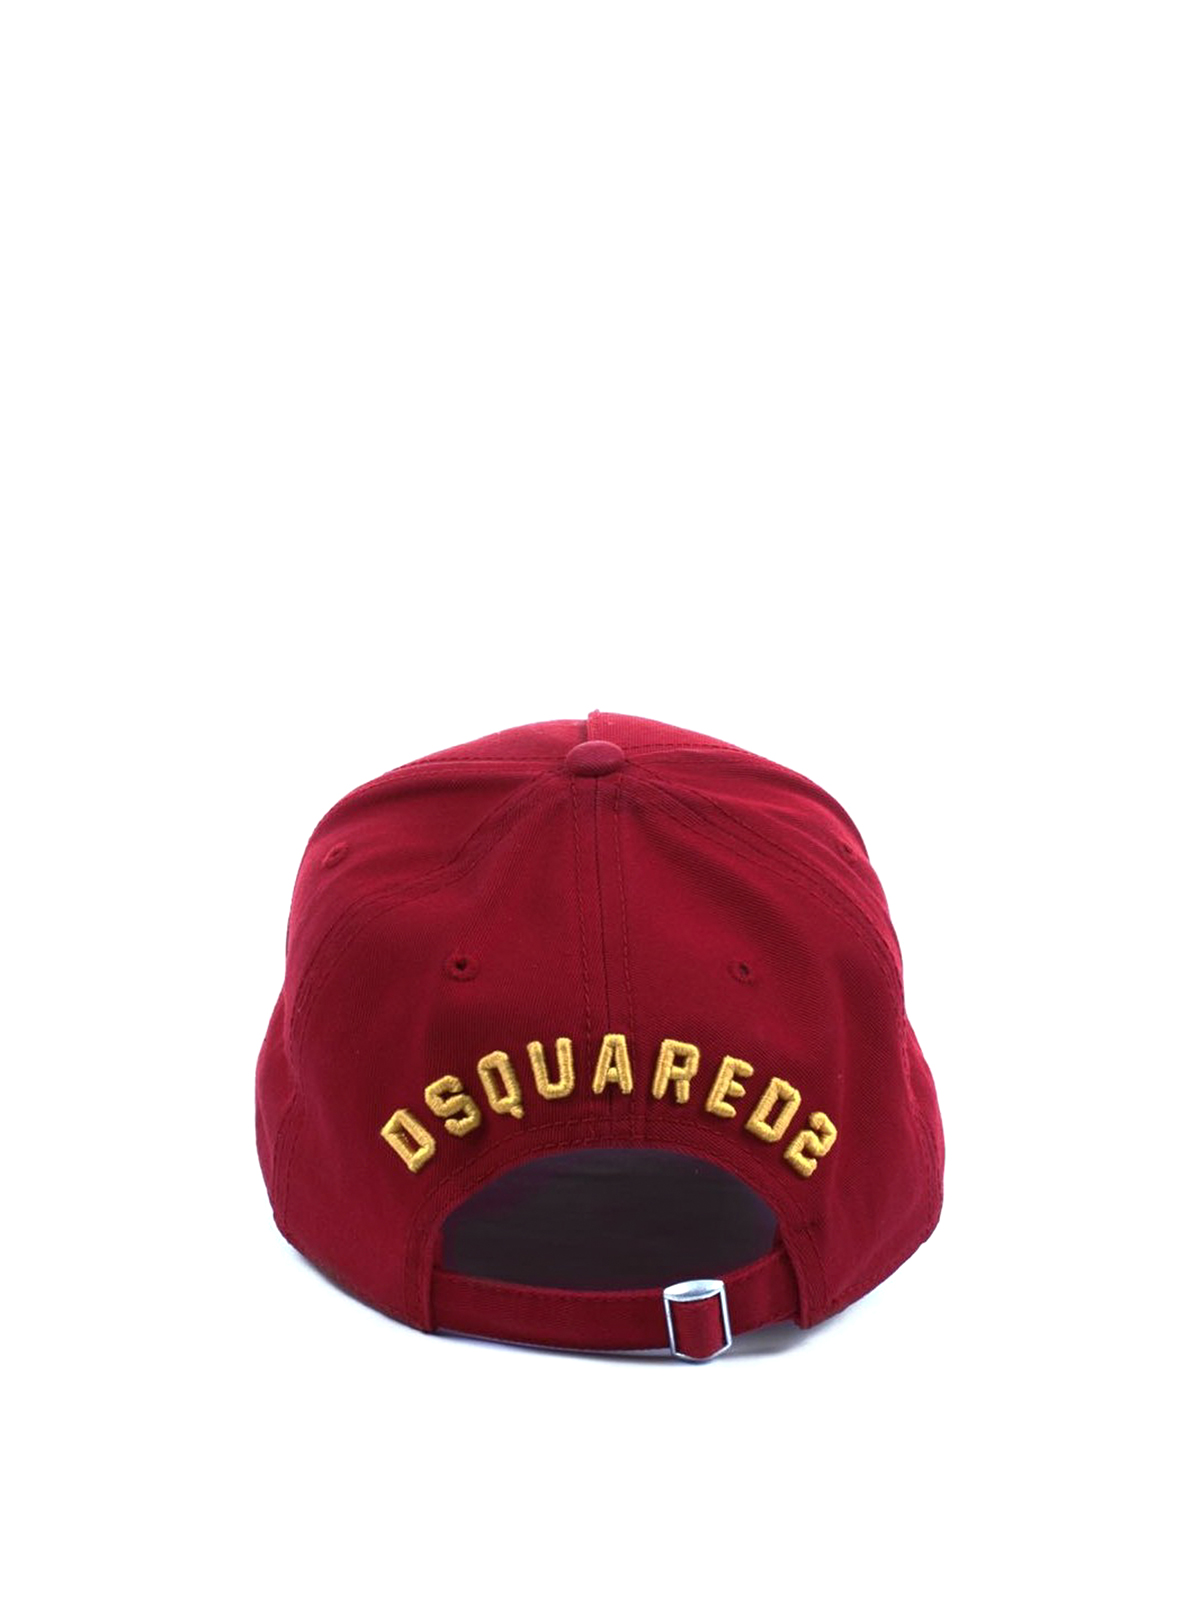 tempo verkoudheid Harde wind Hats & caps Dsquared2 - Icon embroidered red baseball cap -  BCM400105C00001M1390